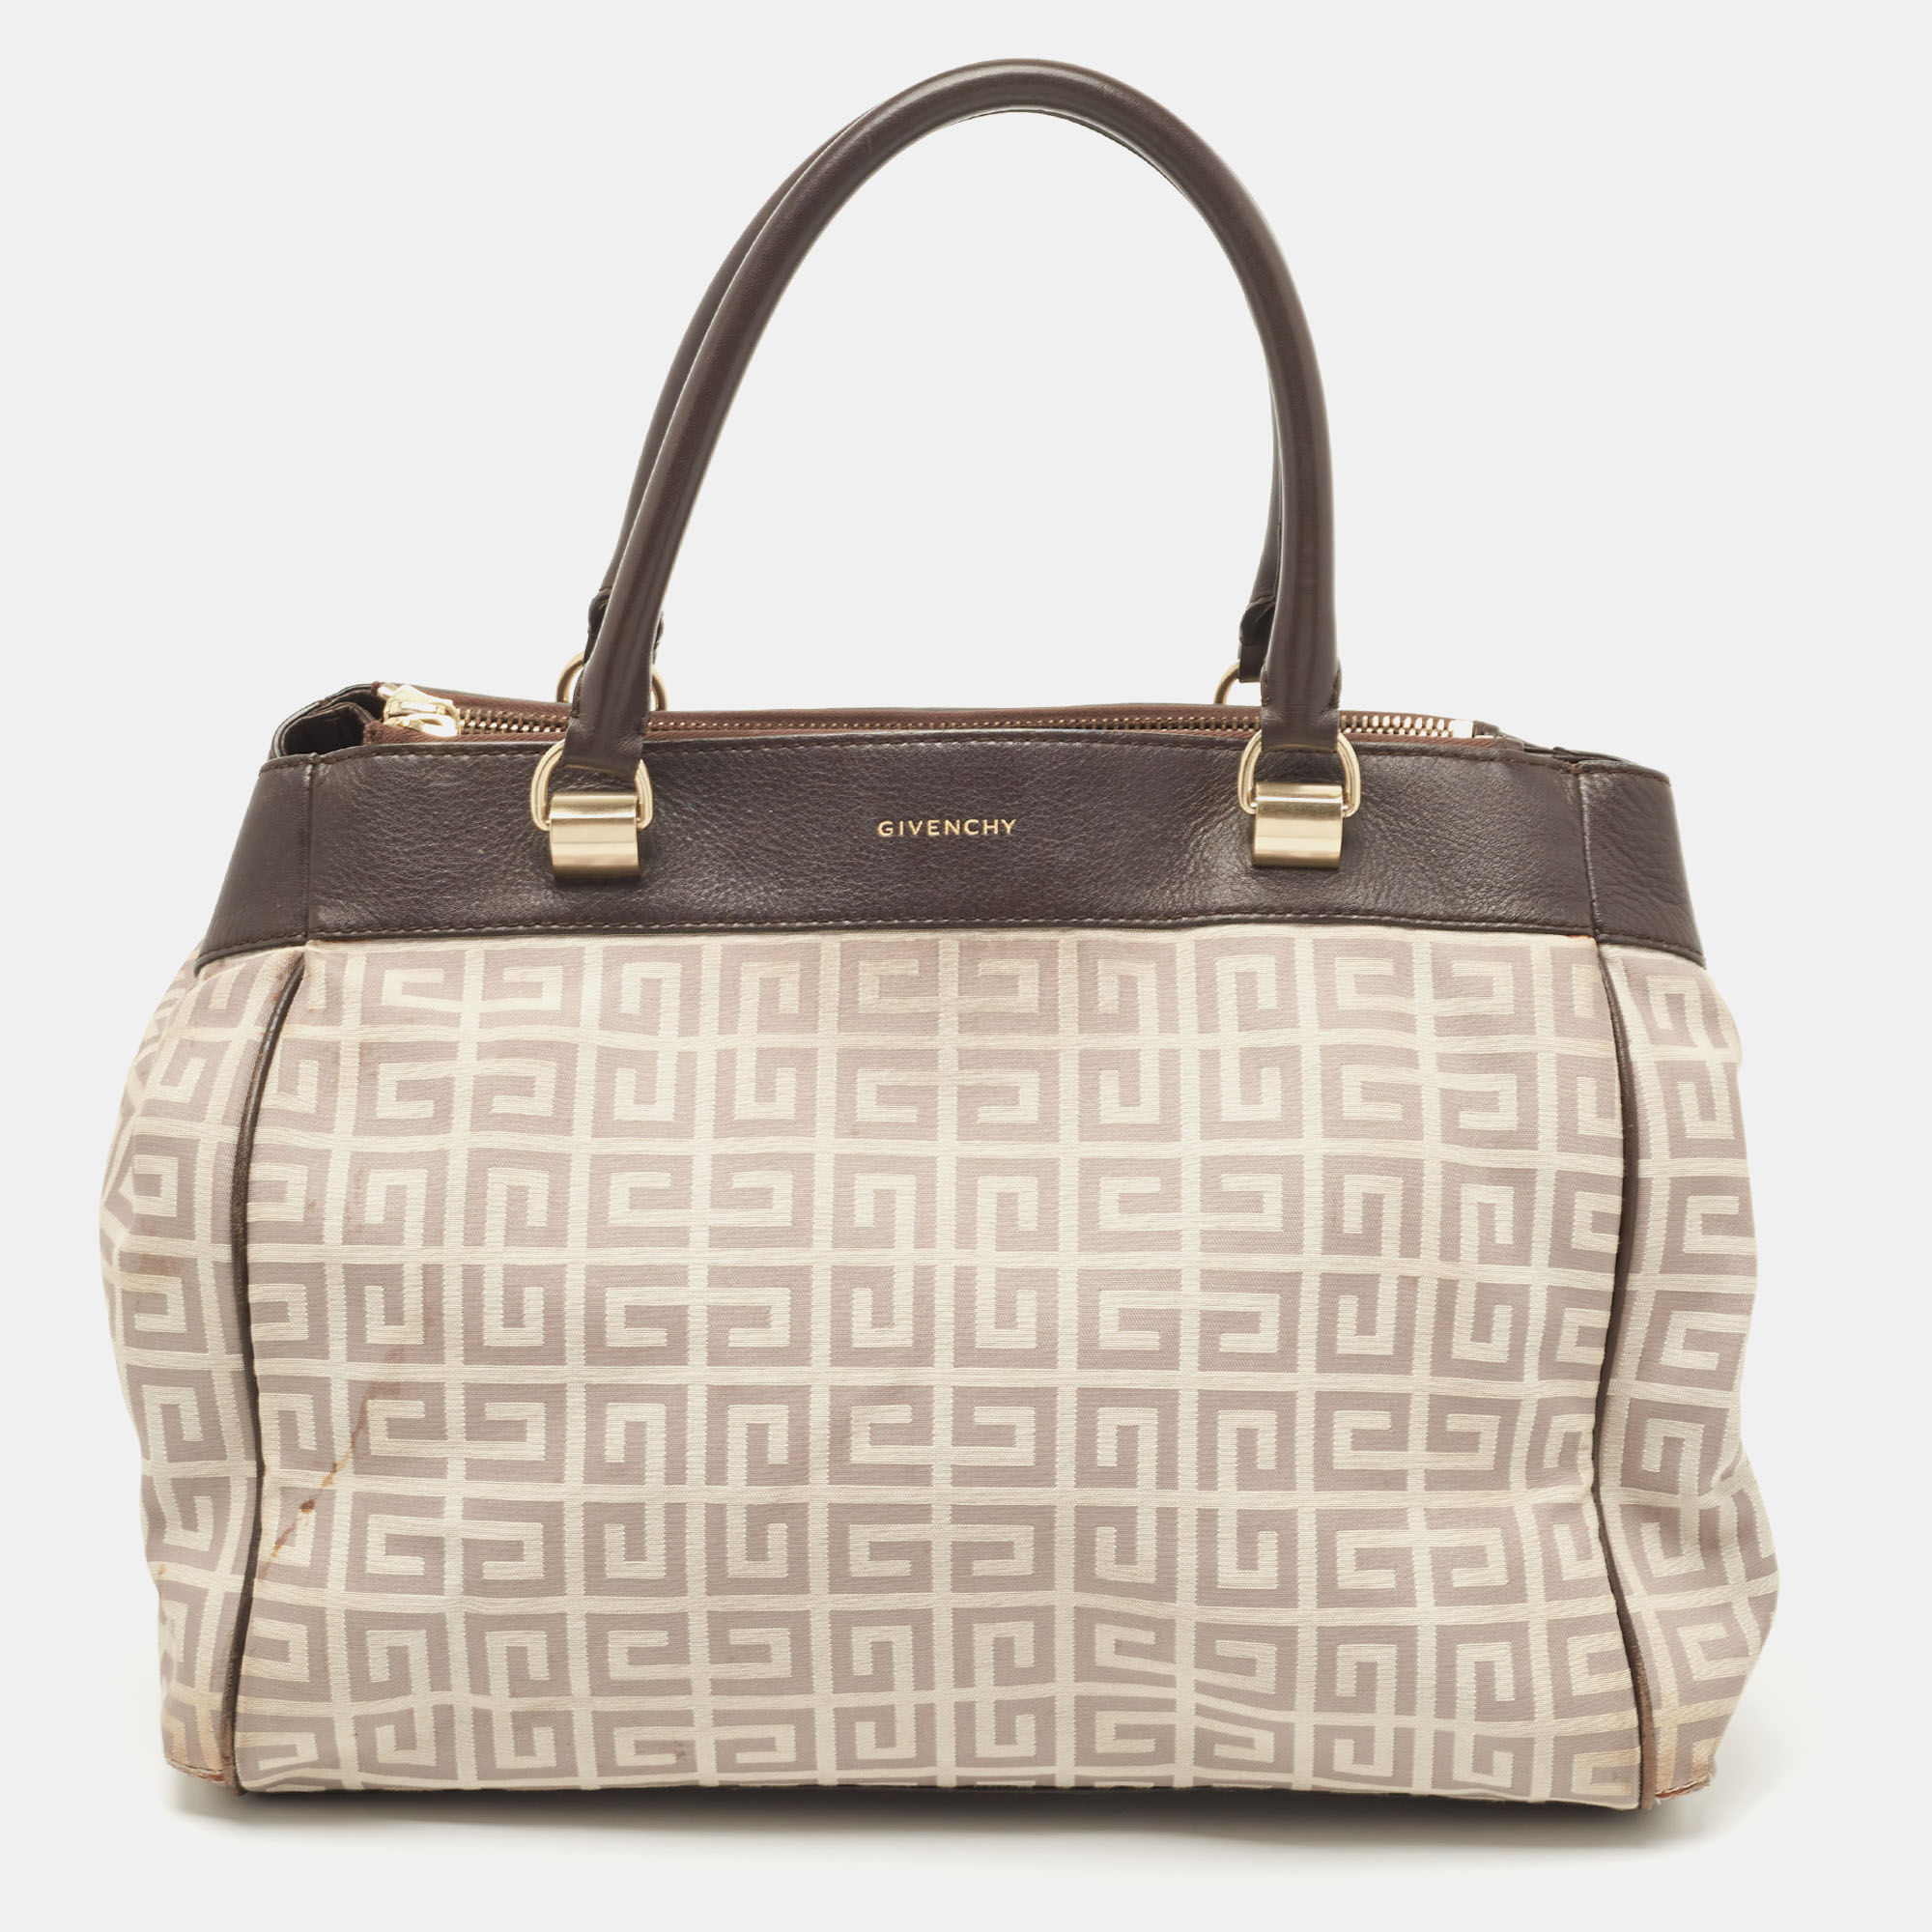 Givenchy Dark Brown/Beige Monogram Canvas And Leather Double Zip Tote